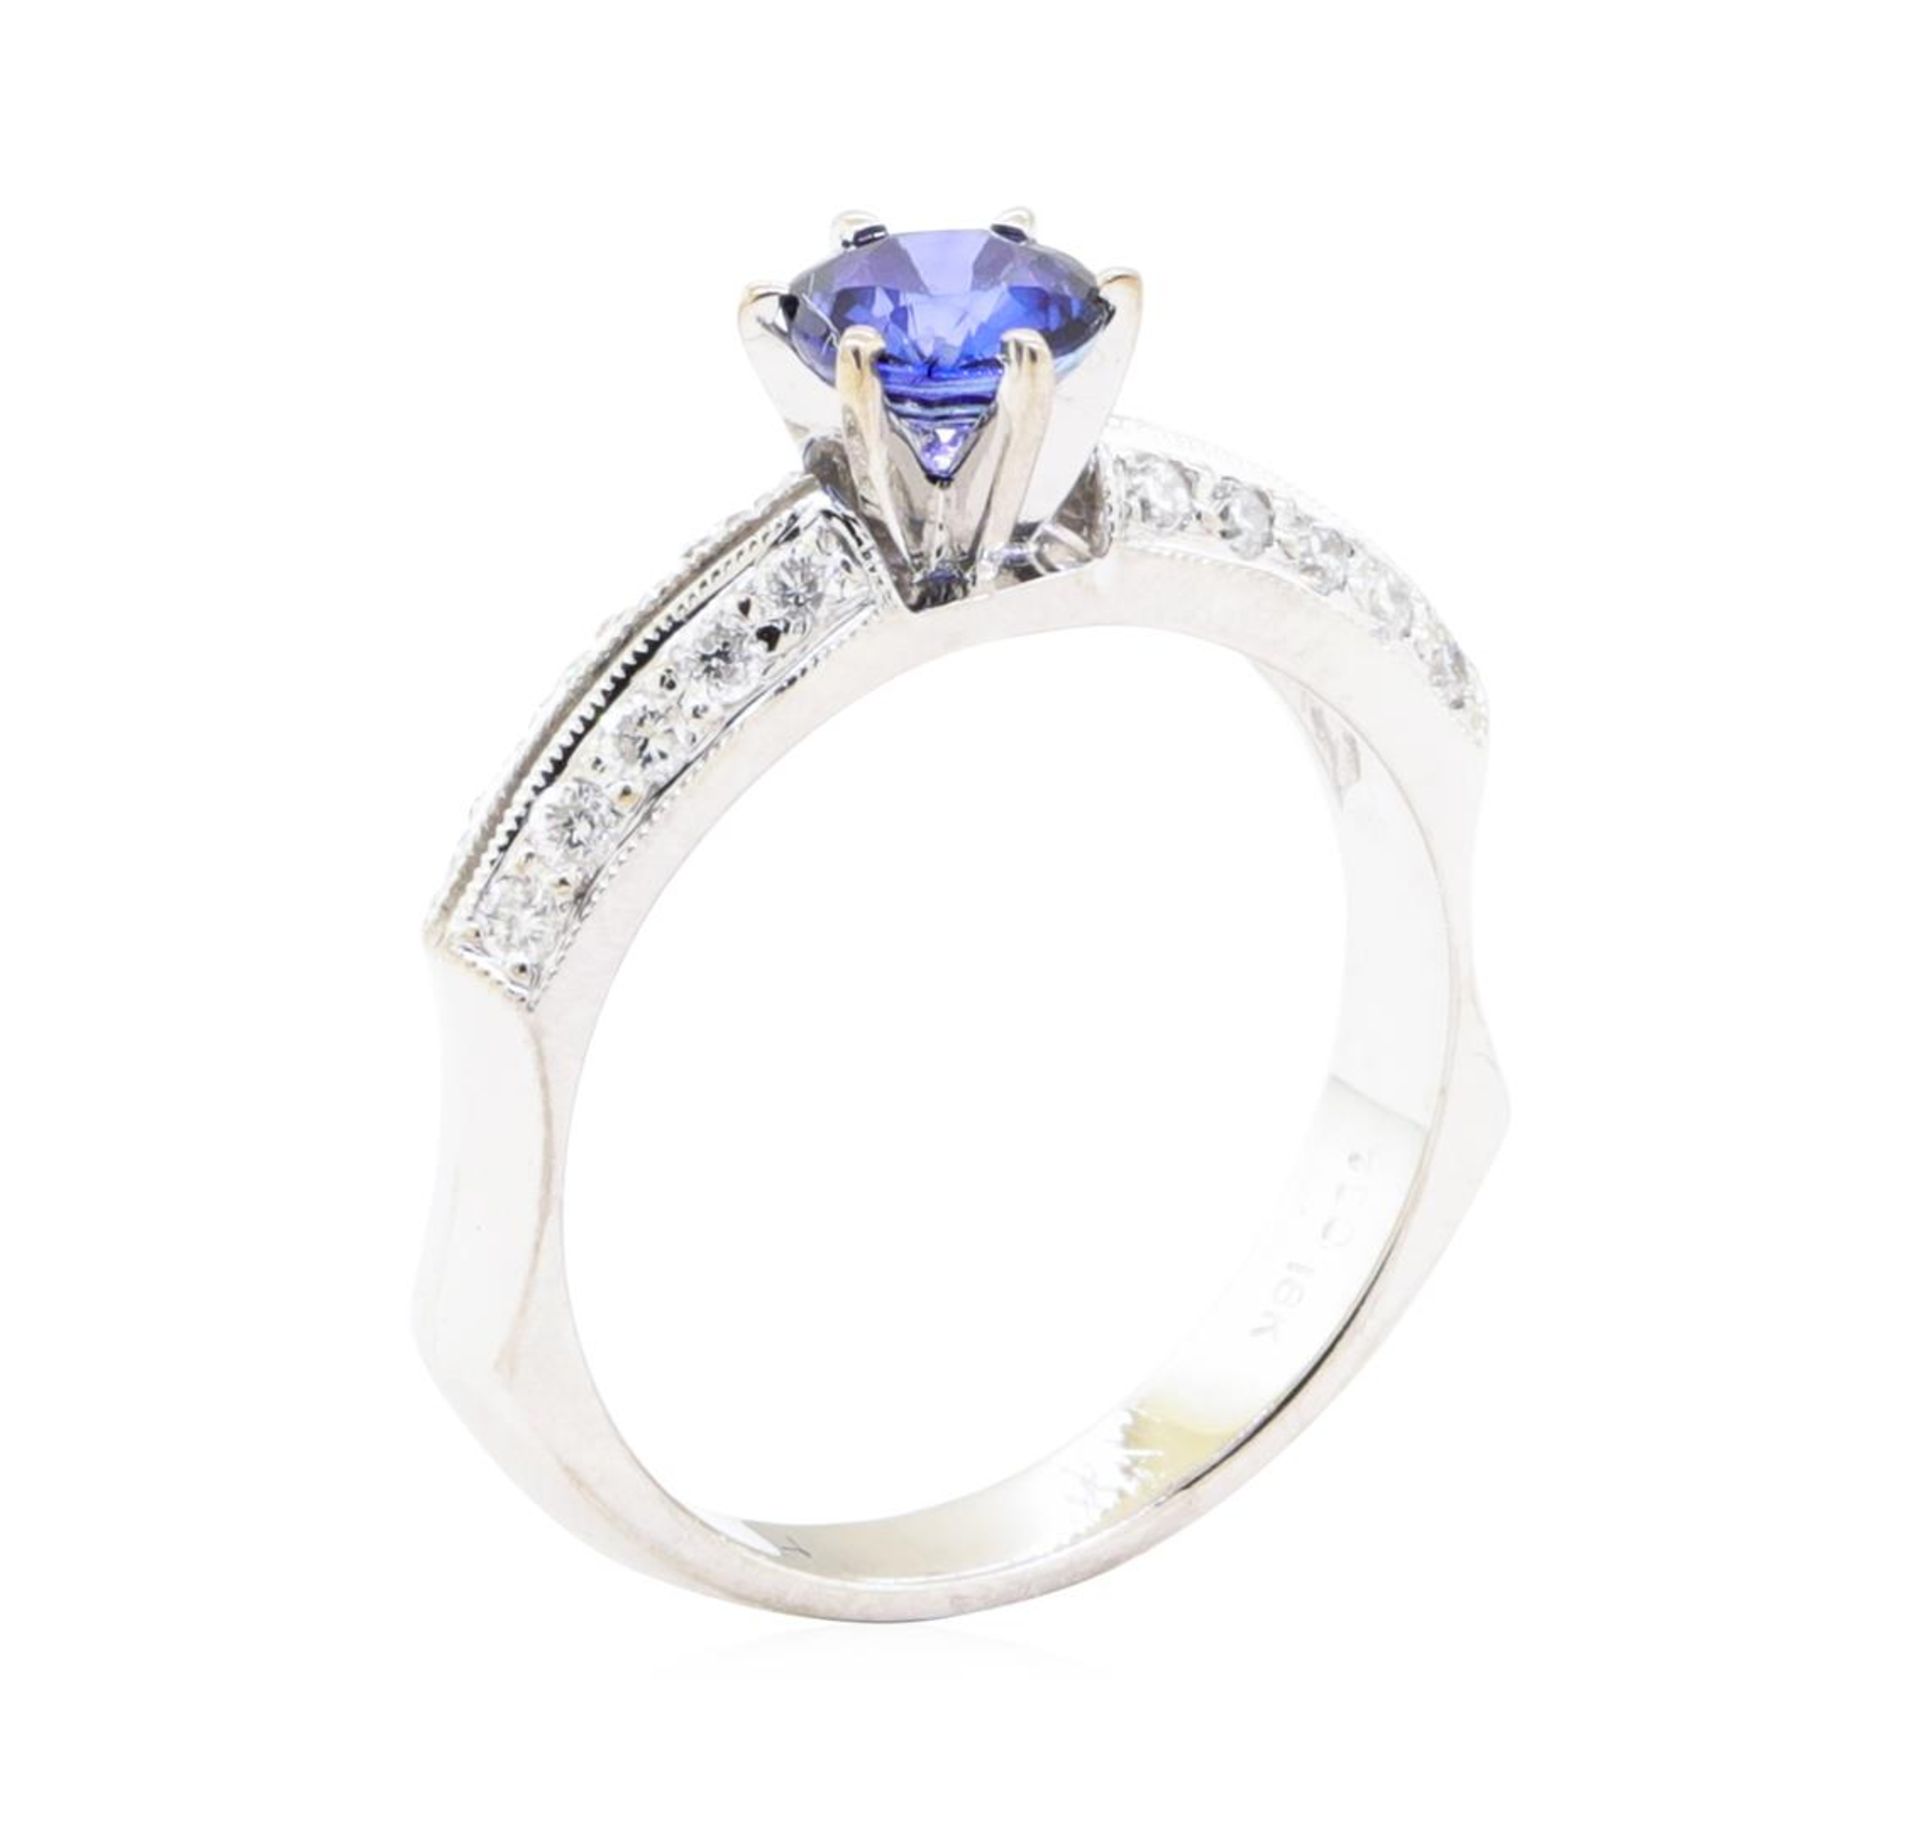 0.95 ctw Sapphire And Diamond Ring - 18KT White Gold - Image 4 of 5